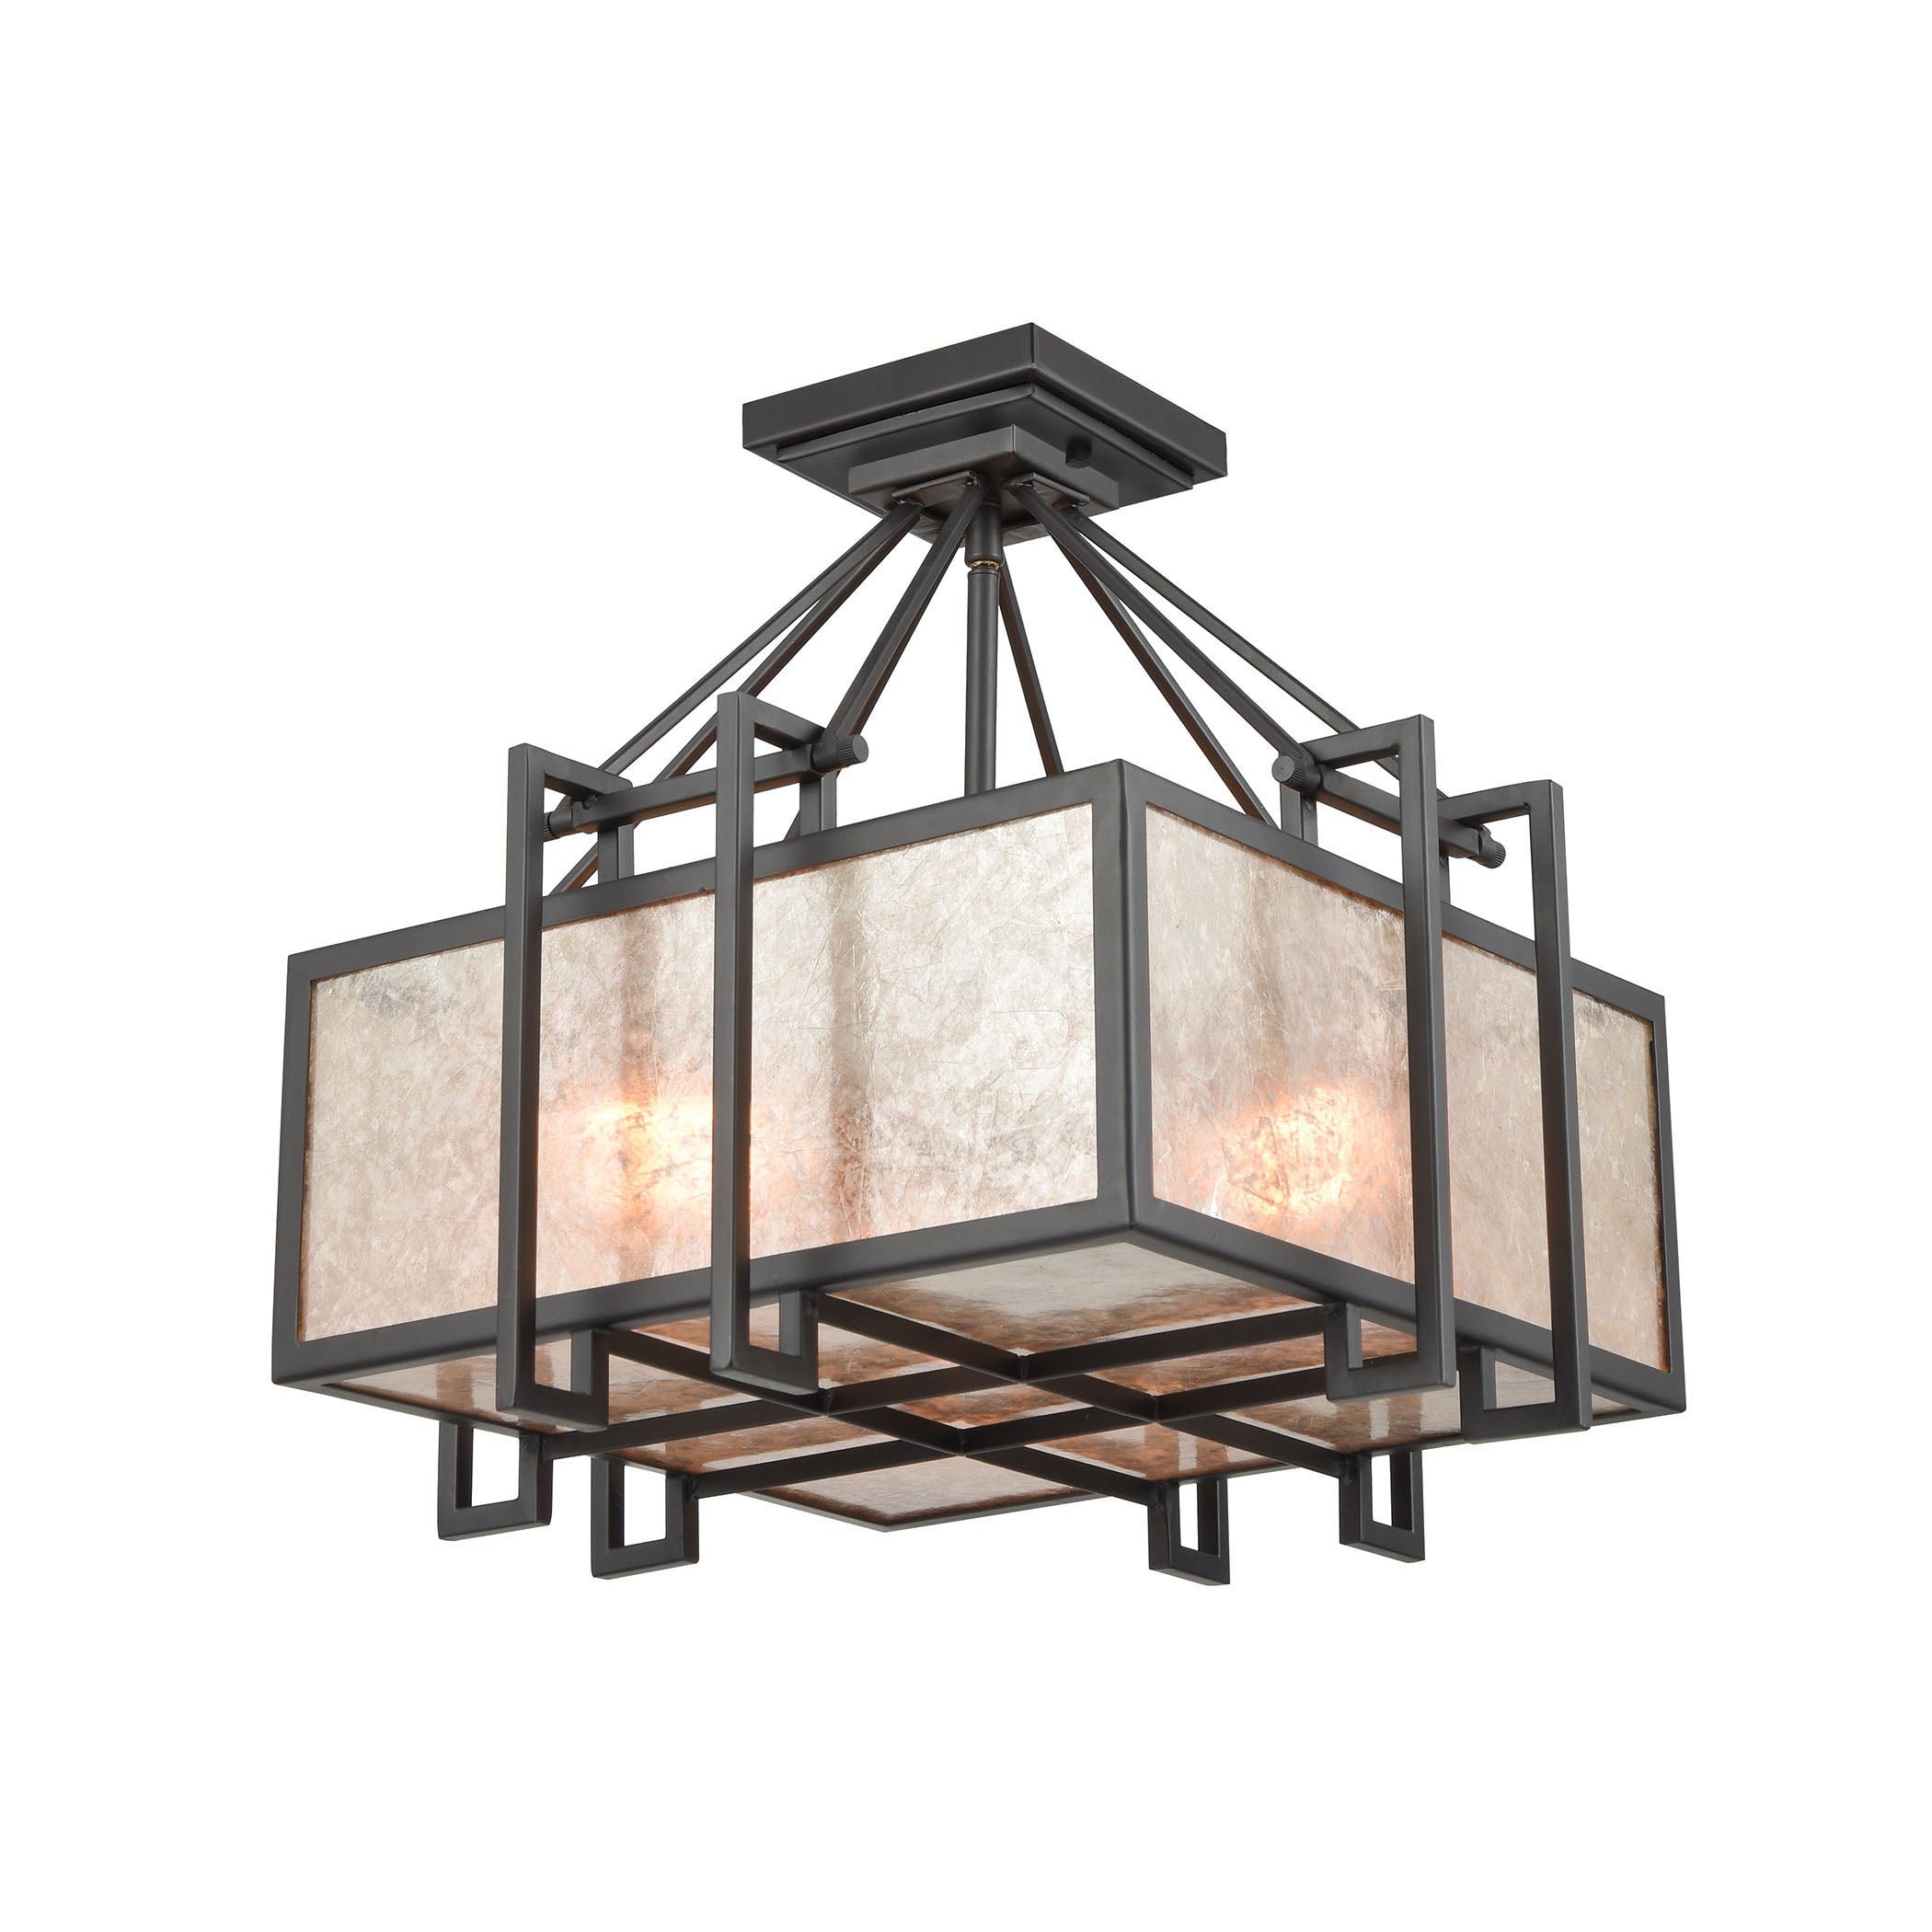 ELK Lighting 16184/3 Stasis 3-Light Chandelier in Oil Rubbed Bronze with Tan and Clear Mica Shade